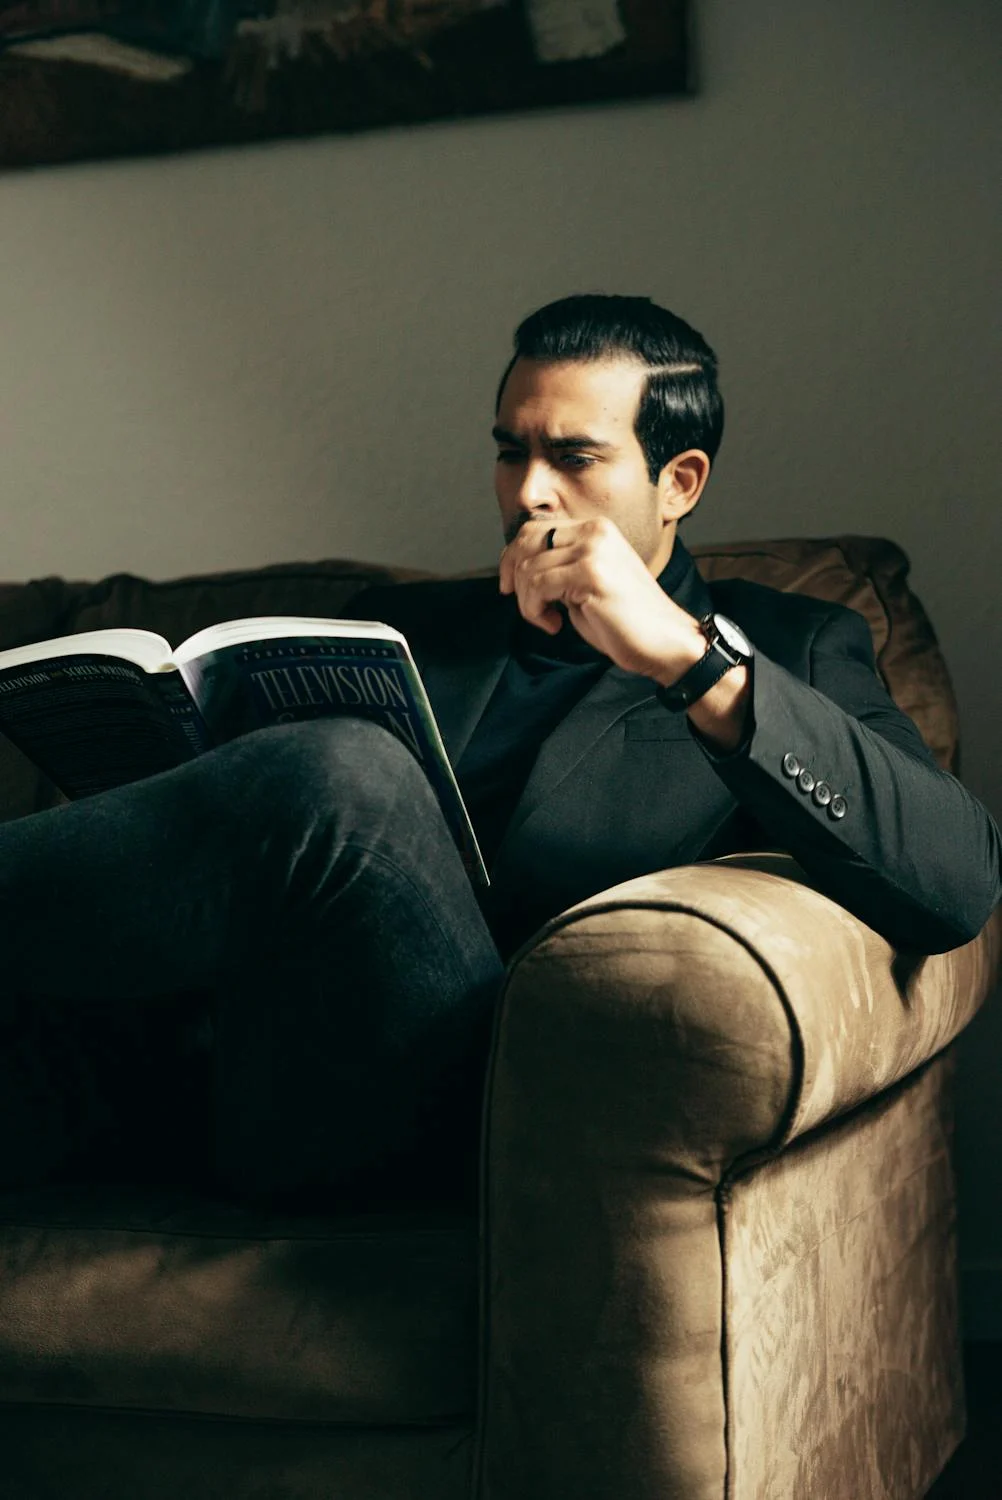 A man sitting on a sofa and reading with a book